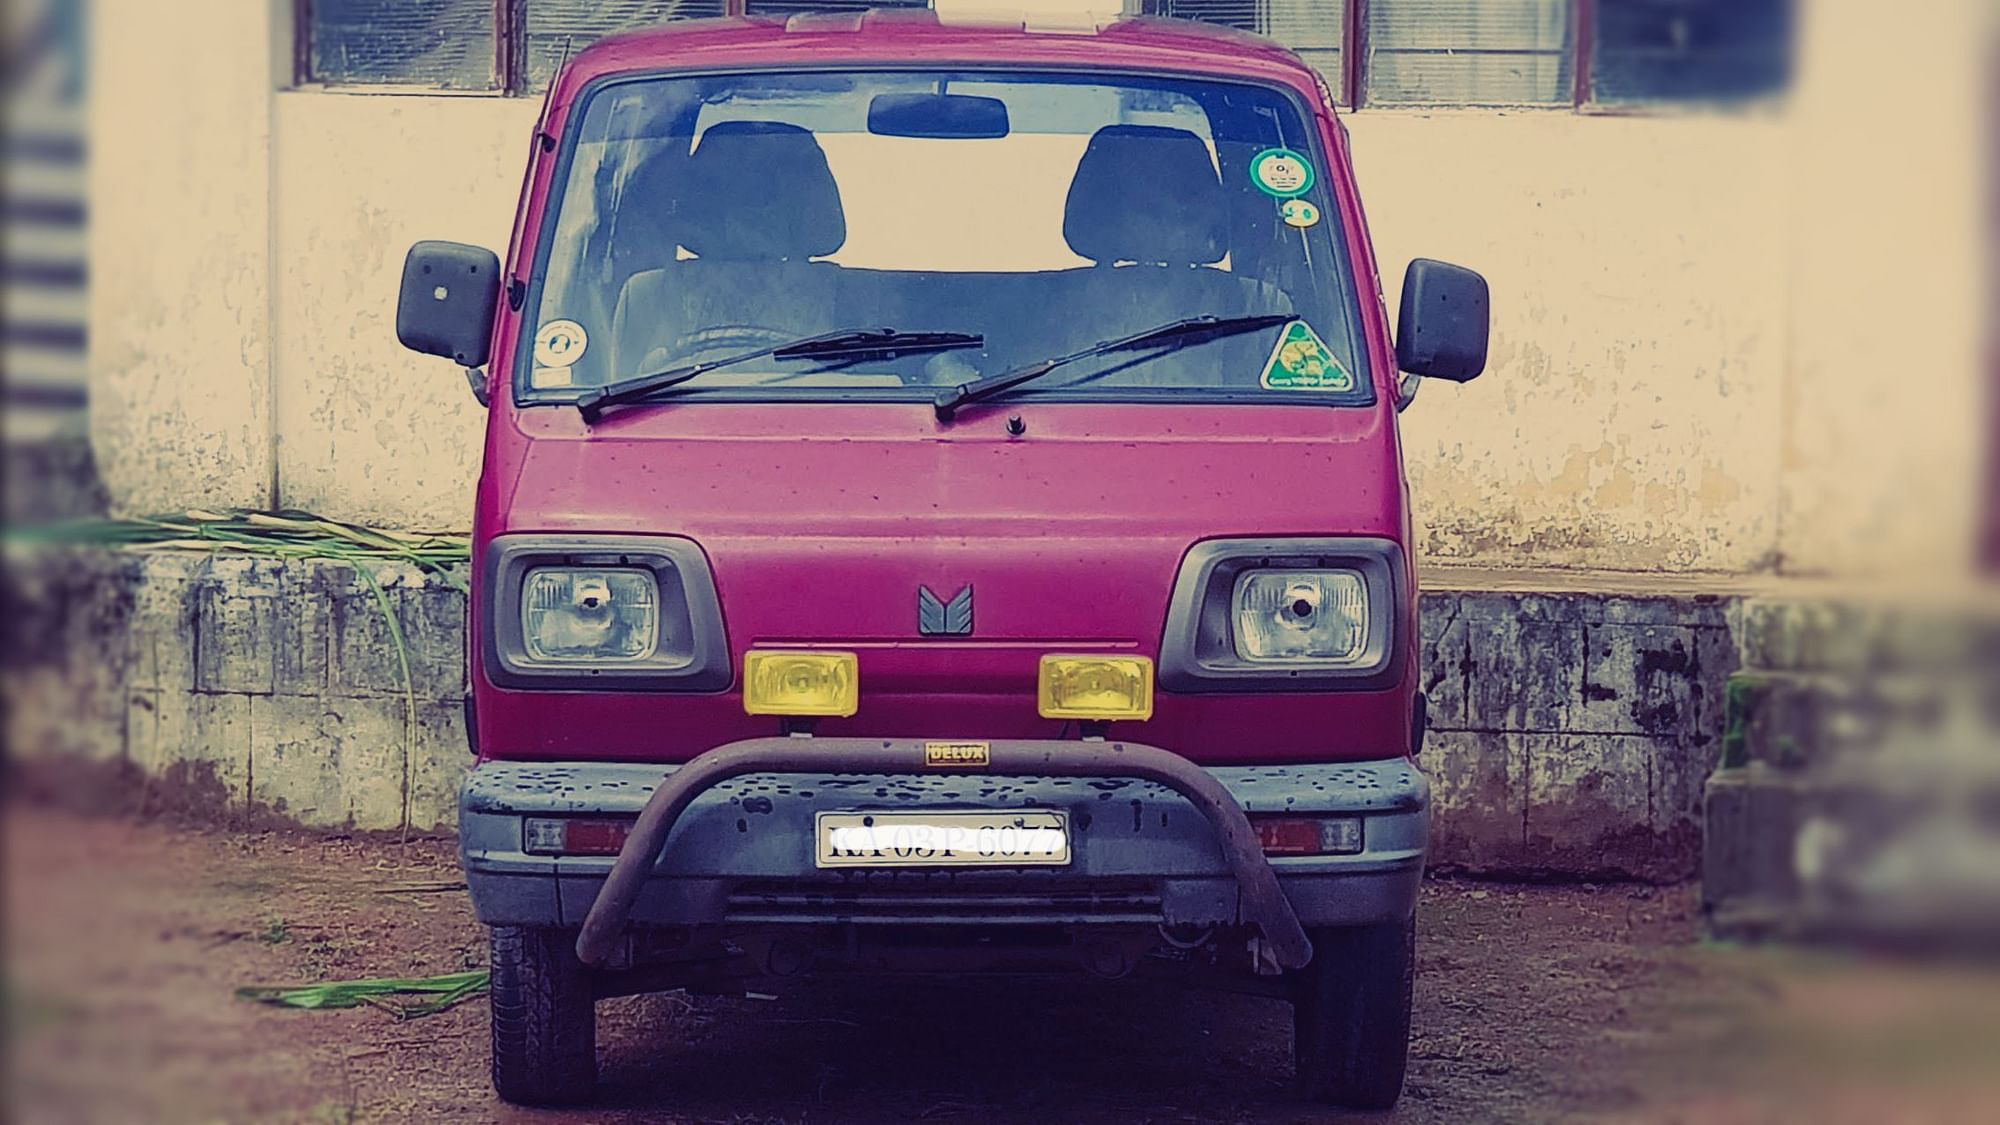 The Maruti Suzuki Omni is being discontinued in 2019 after 35 years.&nbsp;